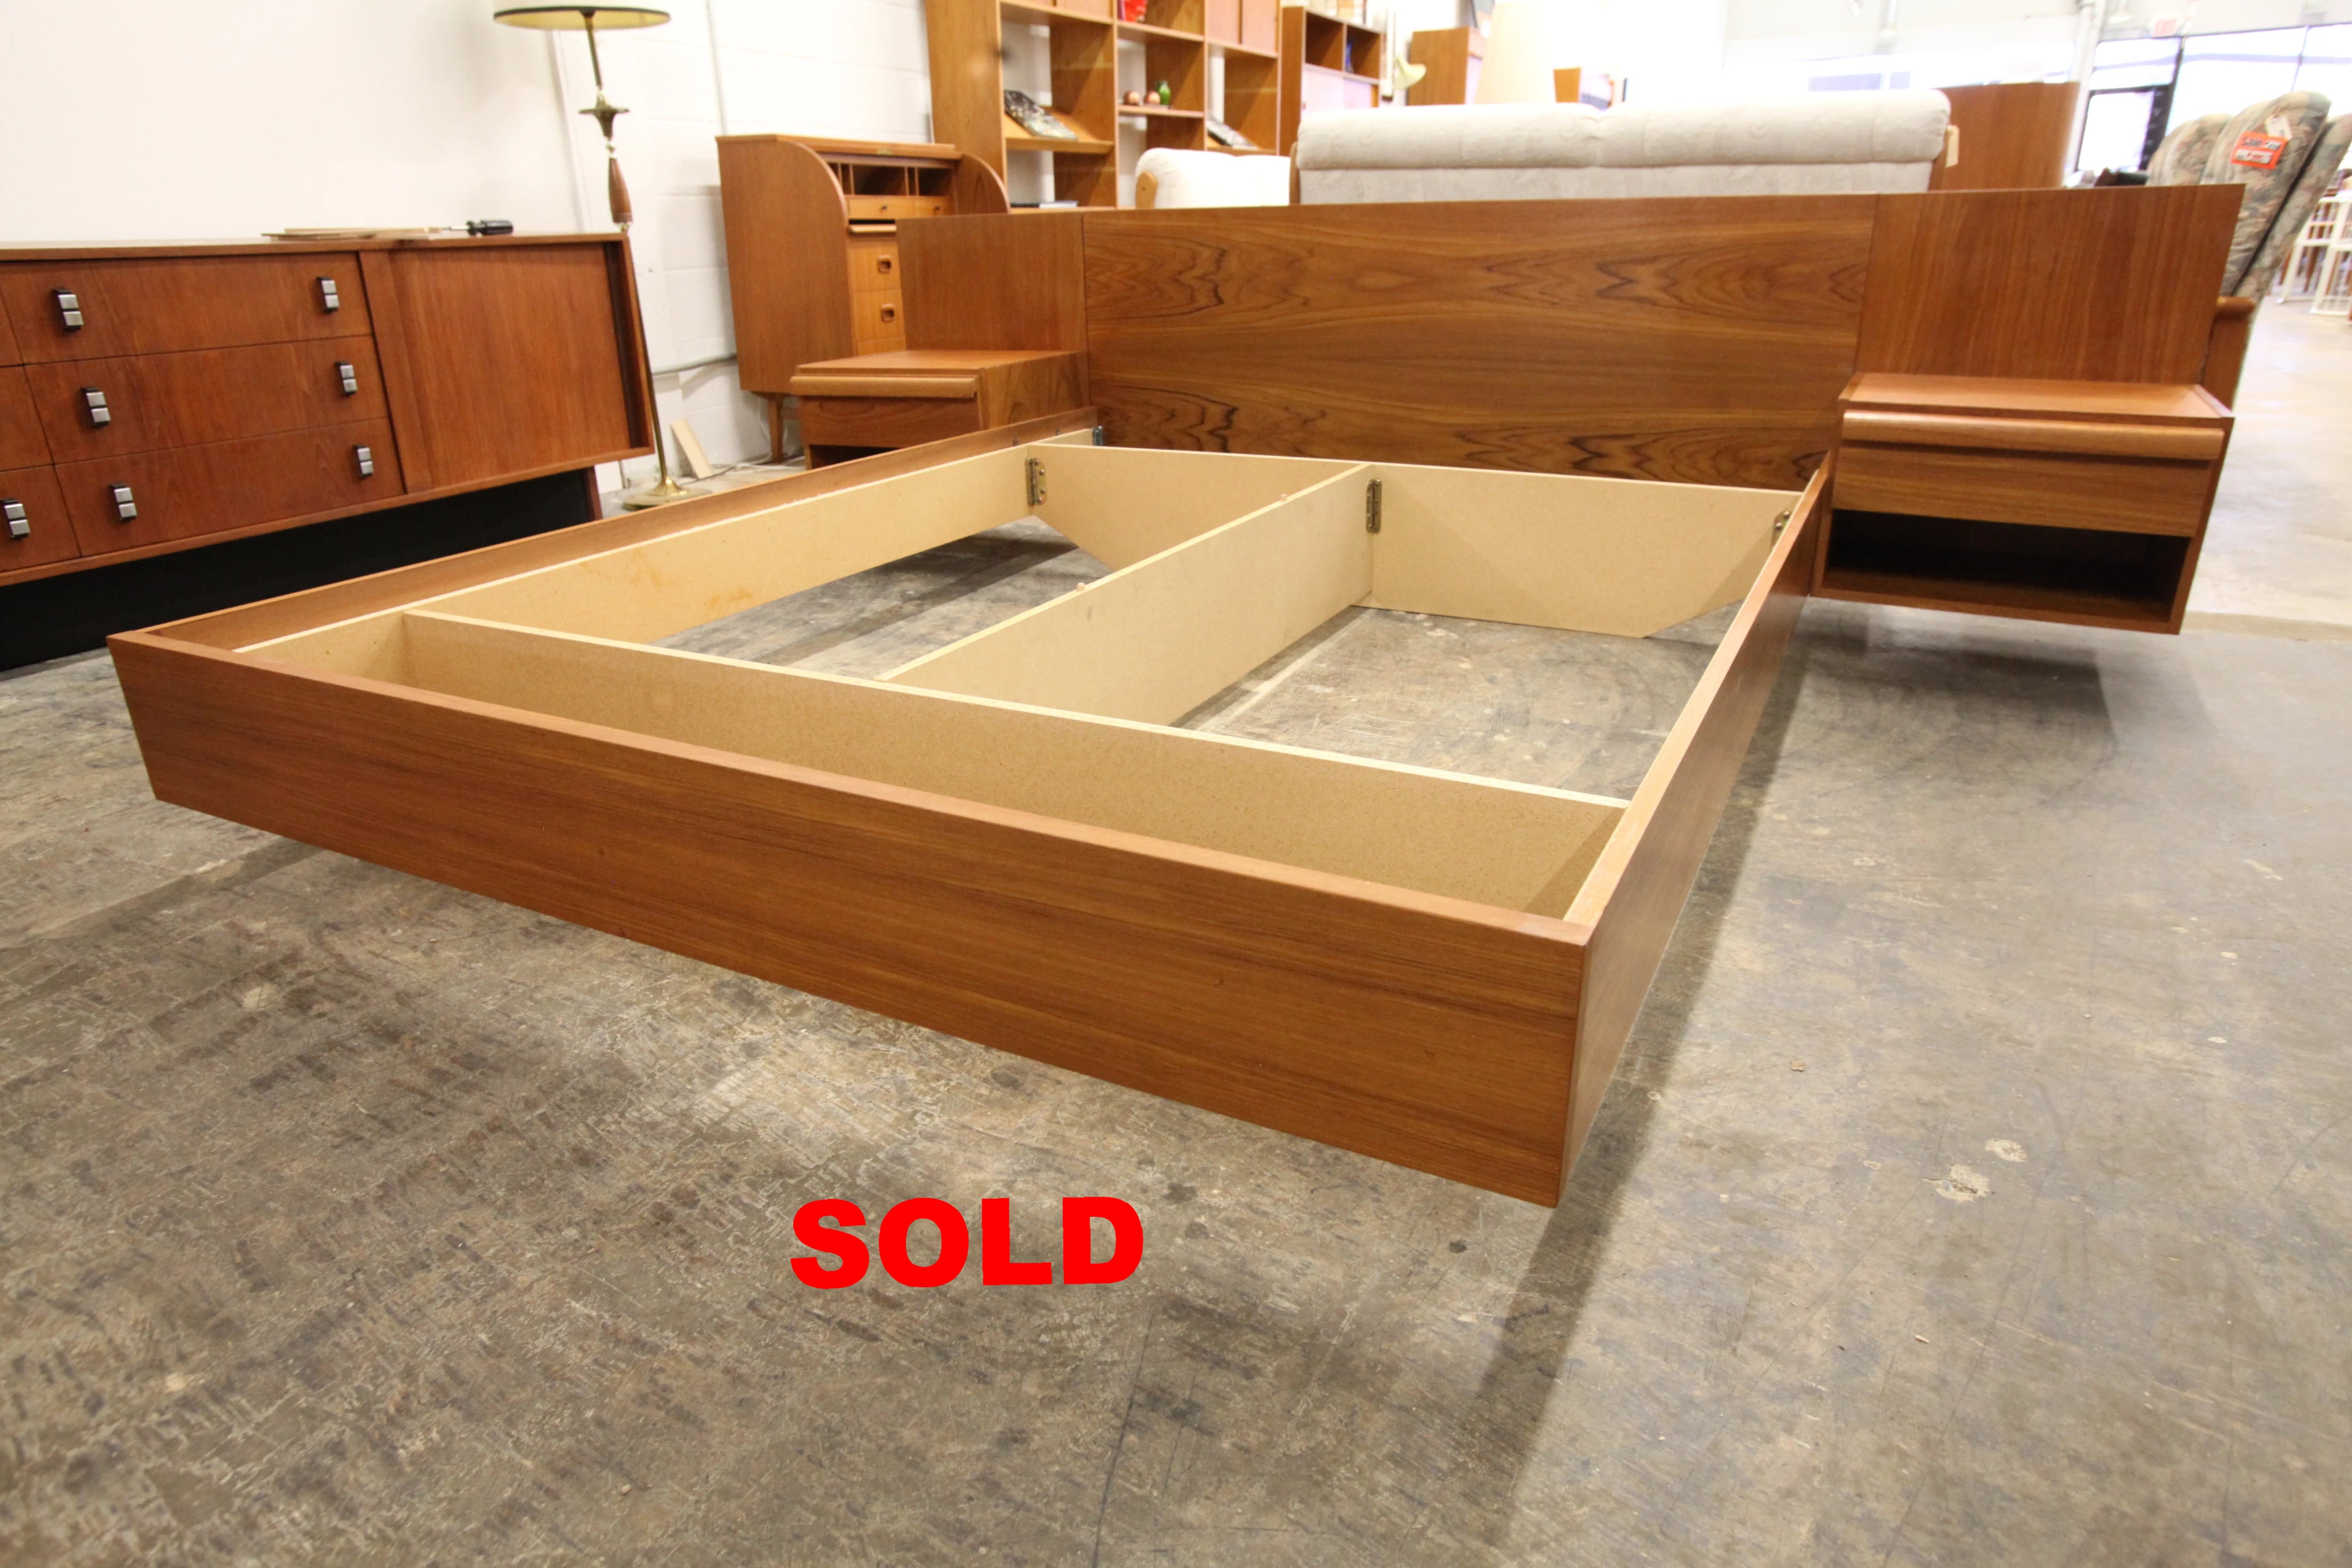 Vintage Teak Queen Bed w/ Floating Night Stands (102.25"W x 82.5"D x 28.75"H)